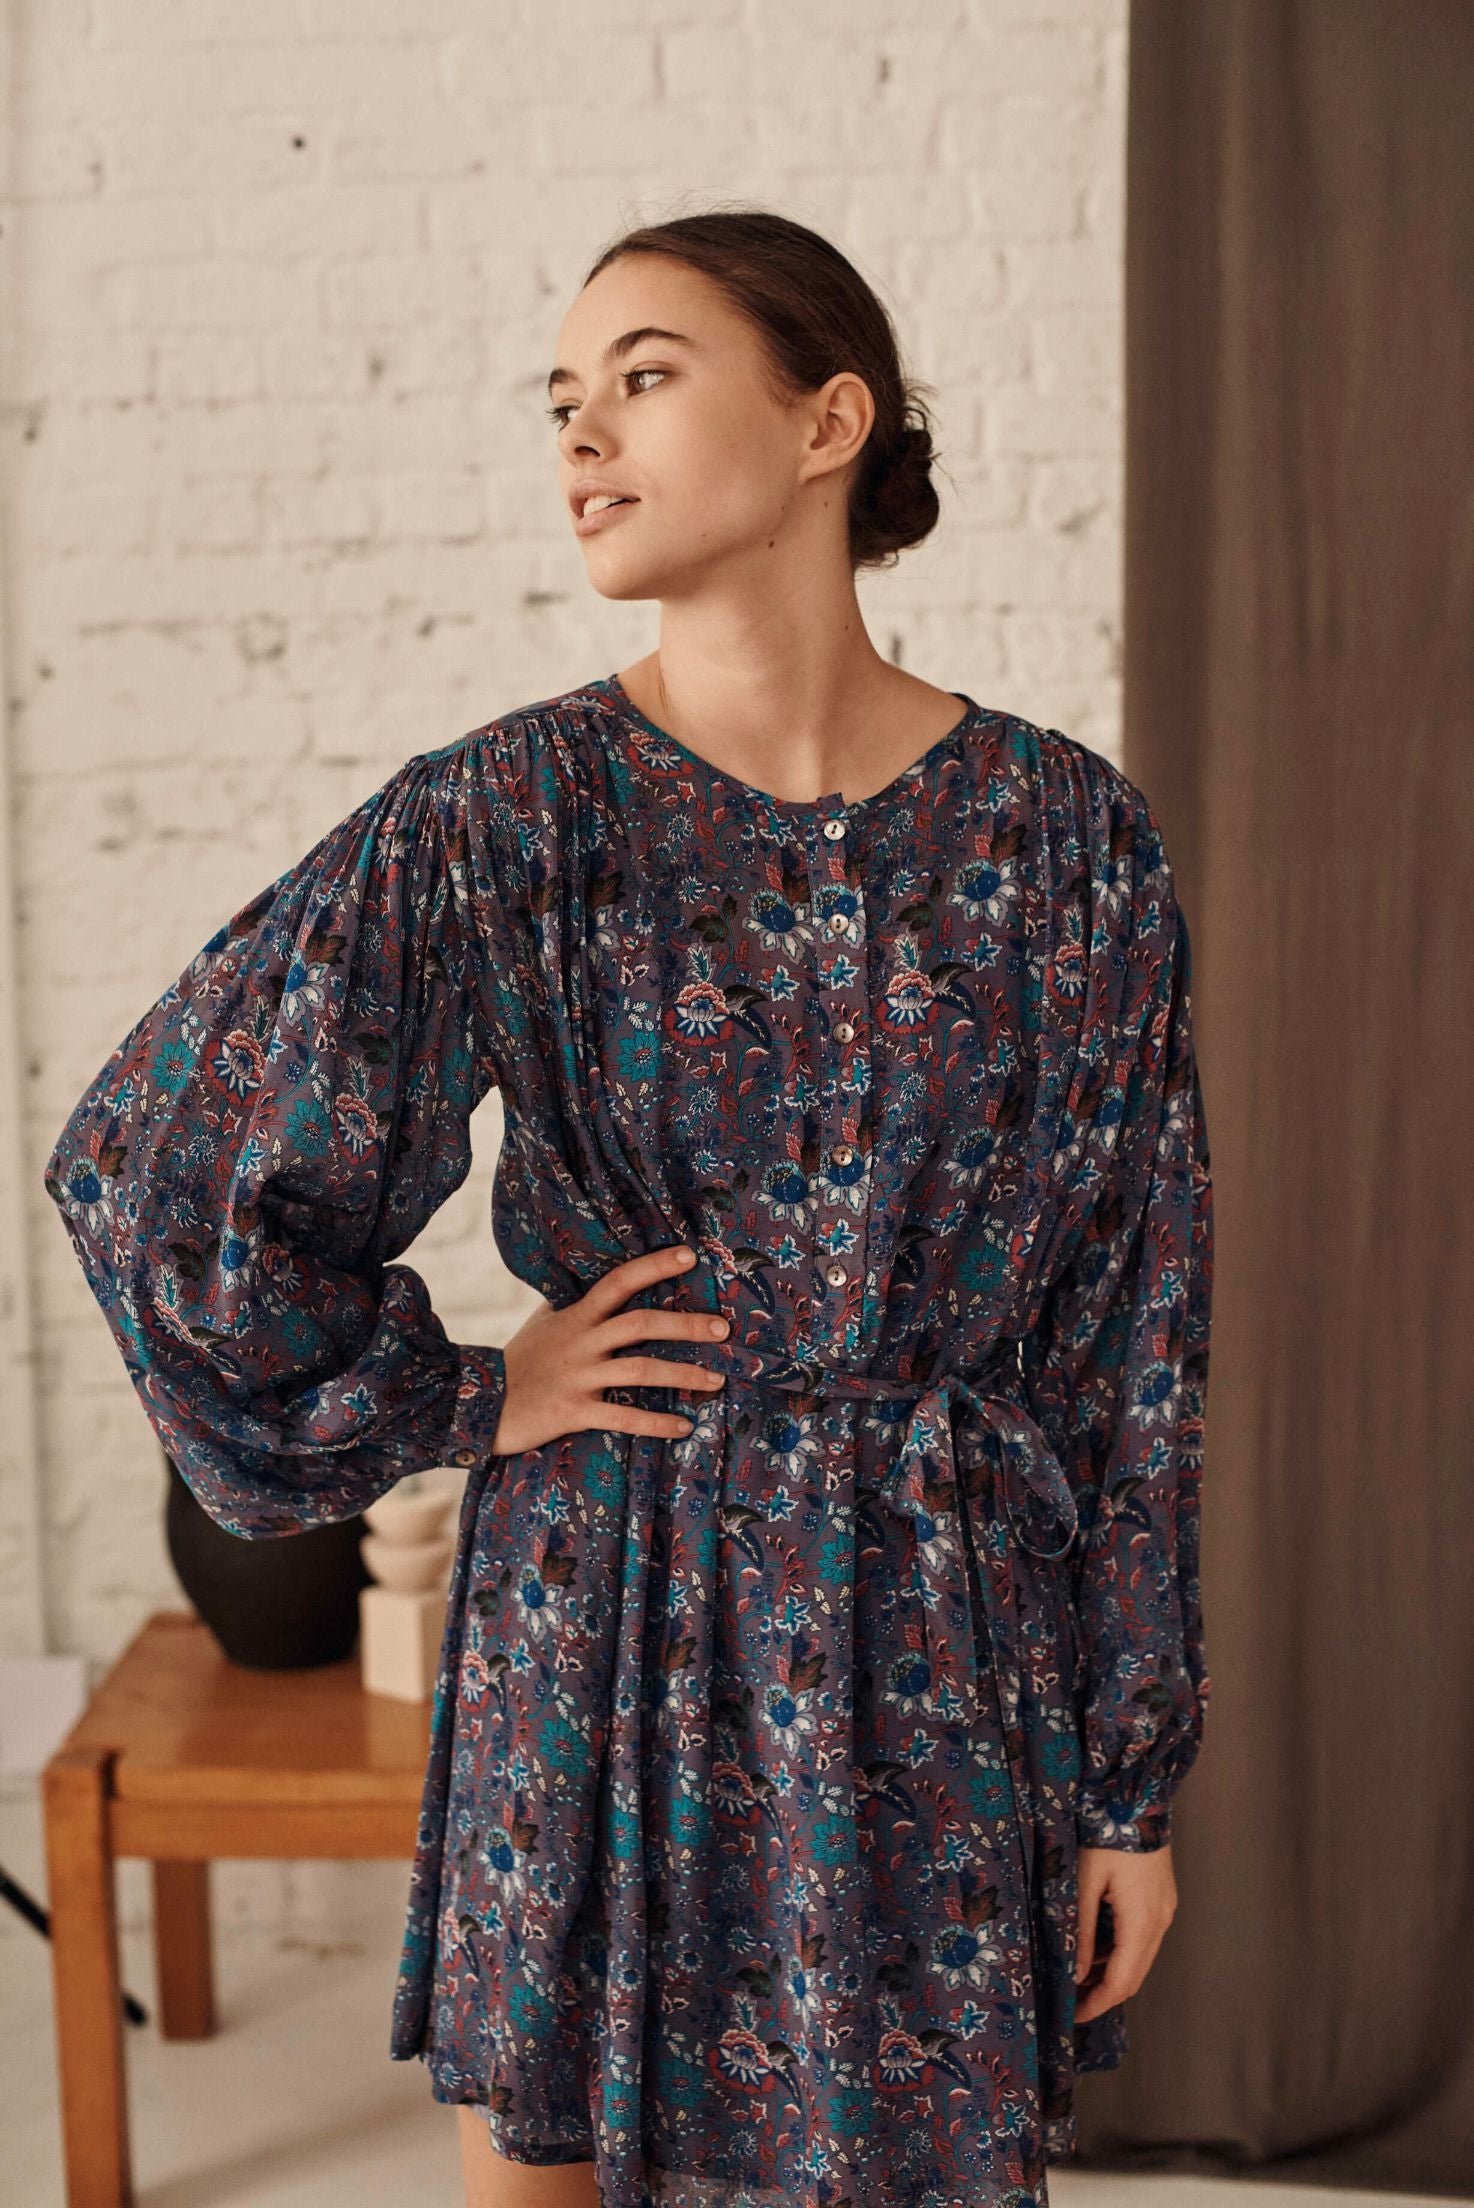 Shana women's dress is a vintage-inspired blue pattern. Very light and breathable model short women dress by Louise Misha. Shana women's dress is breathable and lightweight with a vibrant blue pattern and volume sleeves, perfect to be worn to work, after work and on weekends. High-quality women's dresses online.